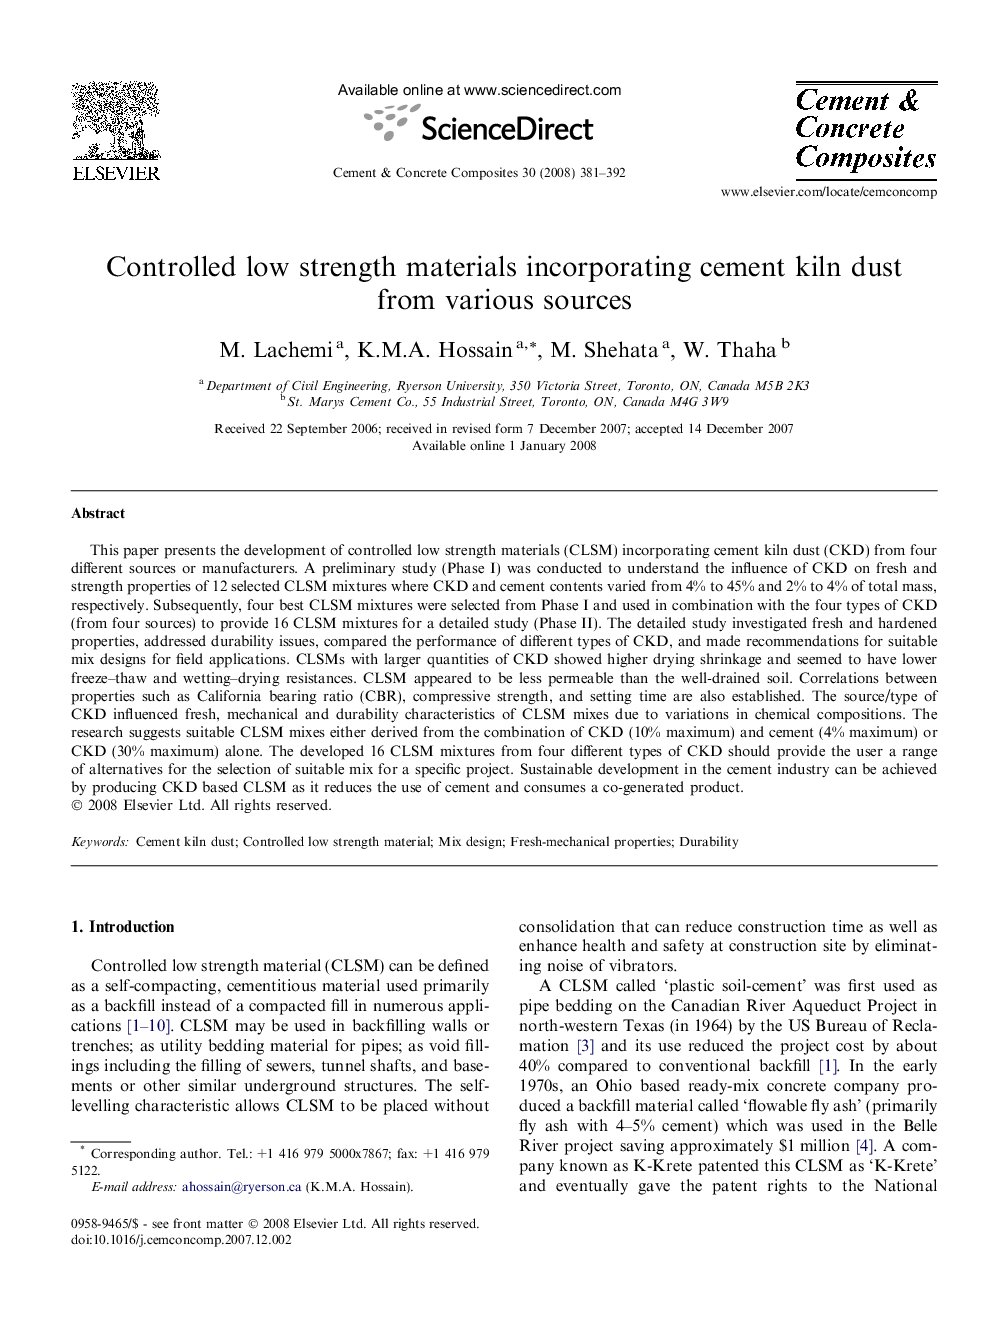 Controlled low strength materials incorporating cement kiln dust from various sources